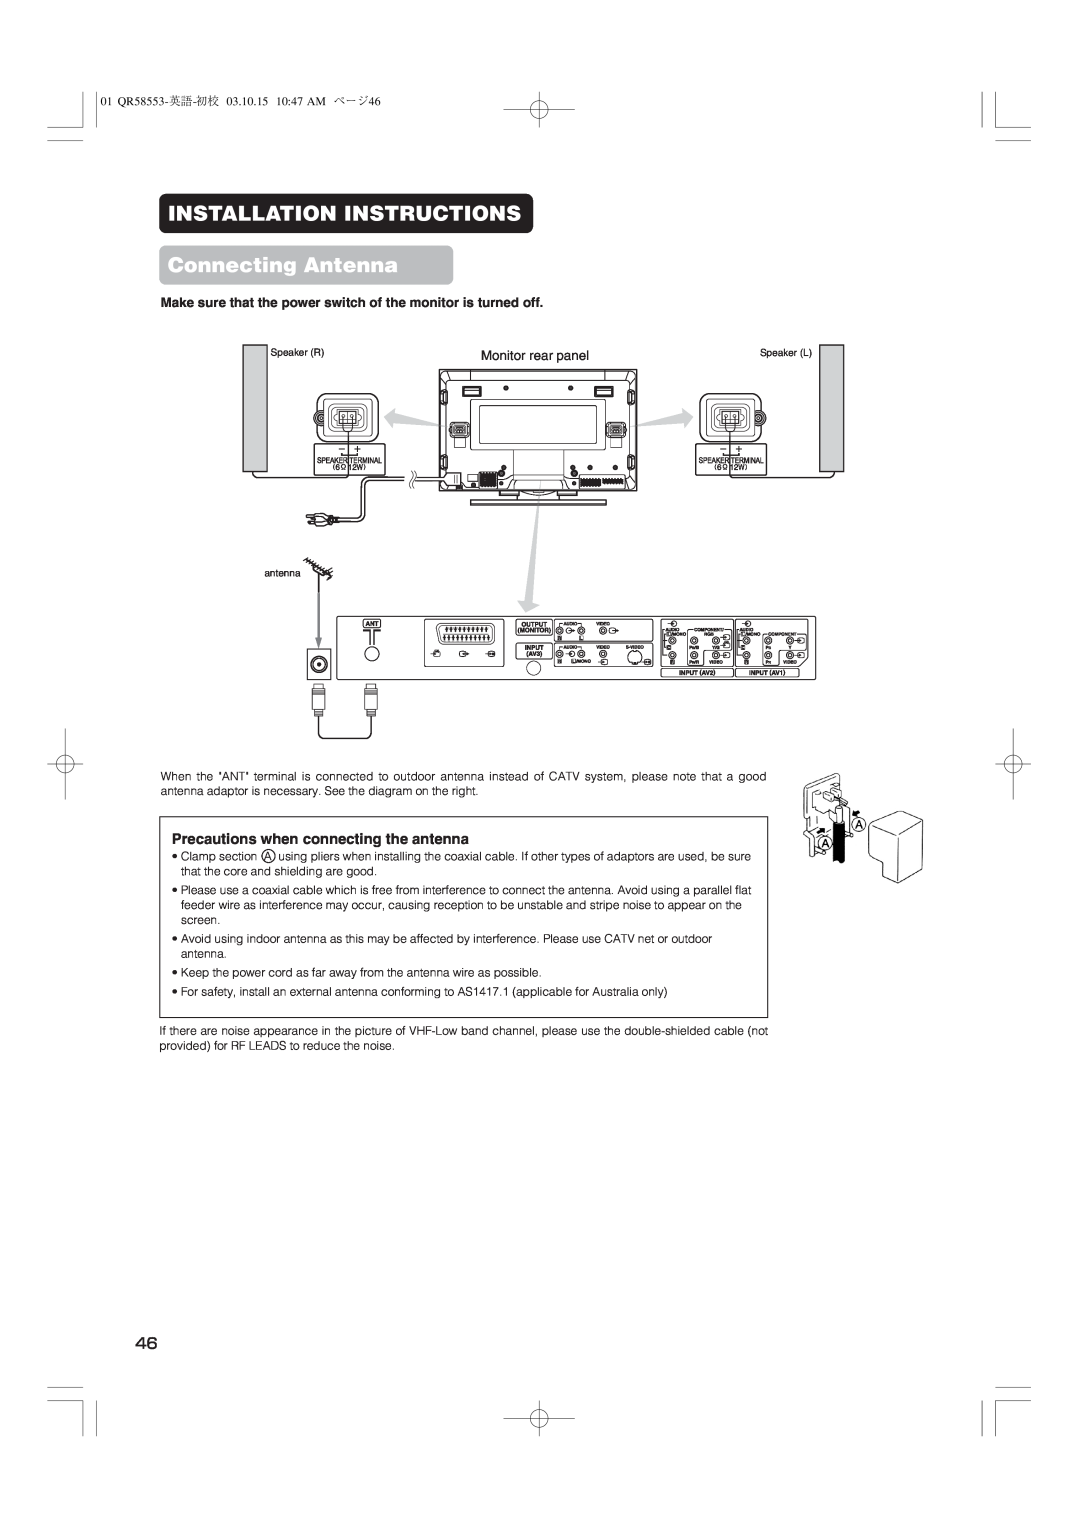 Hitachi 42PD5000 user manual INSTALLATION INSTRUCTIONS Connecting Antenna, Precautions when connecting the antenna 